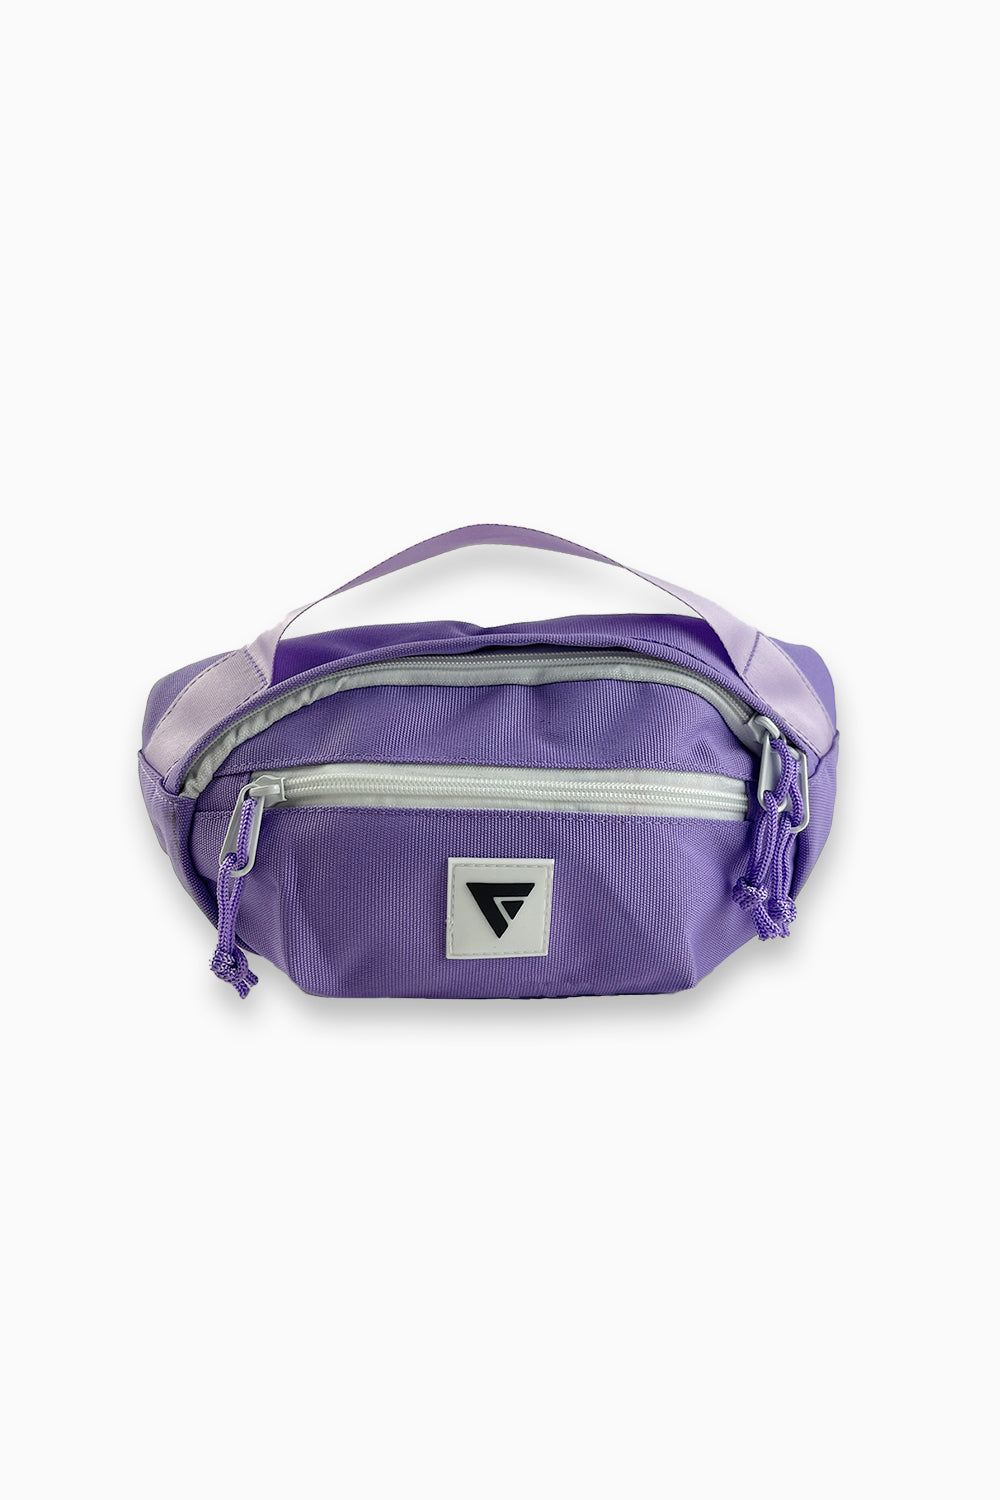 edc purple fanny pack front view